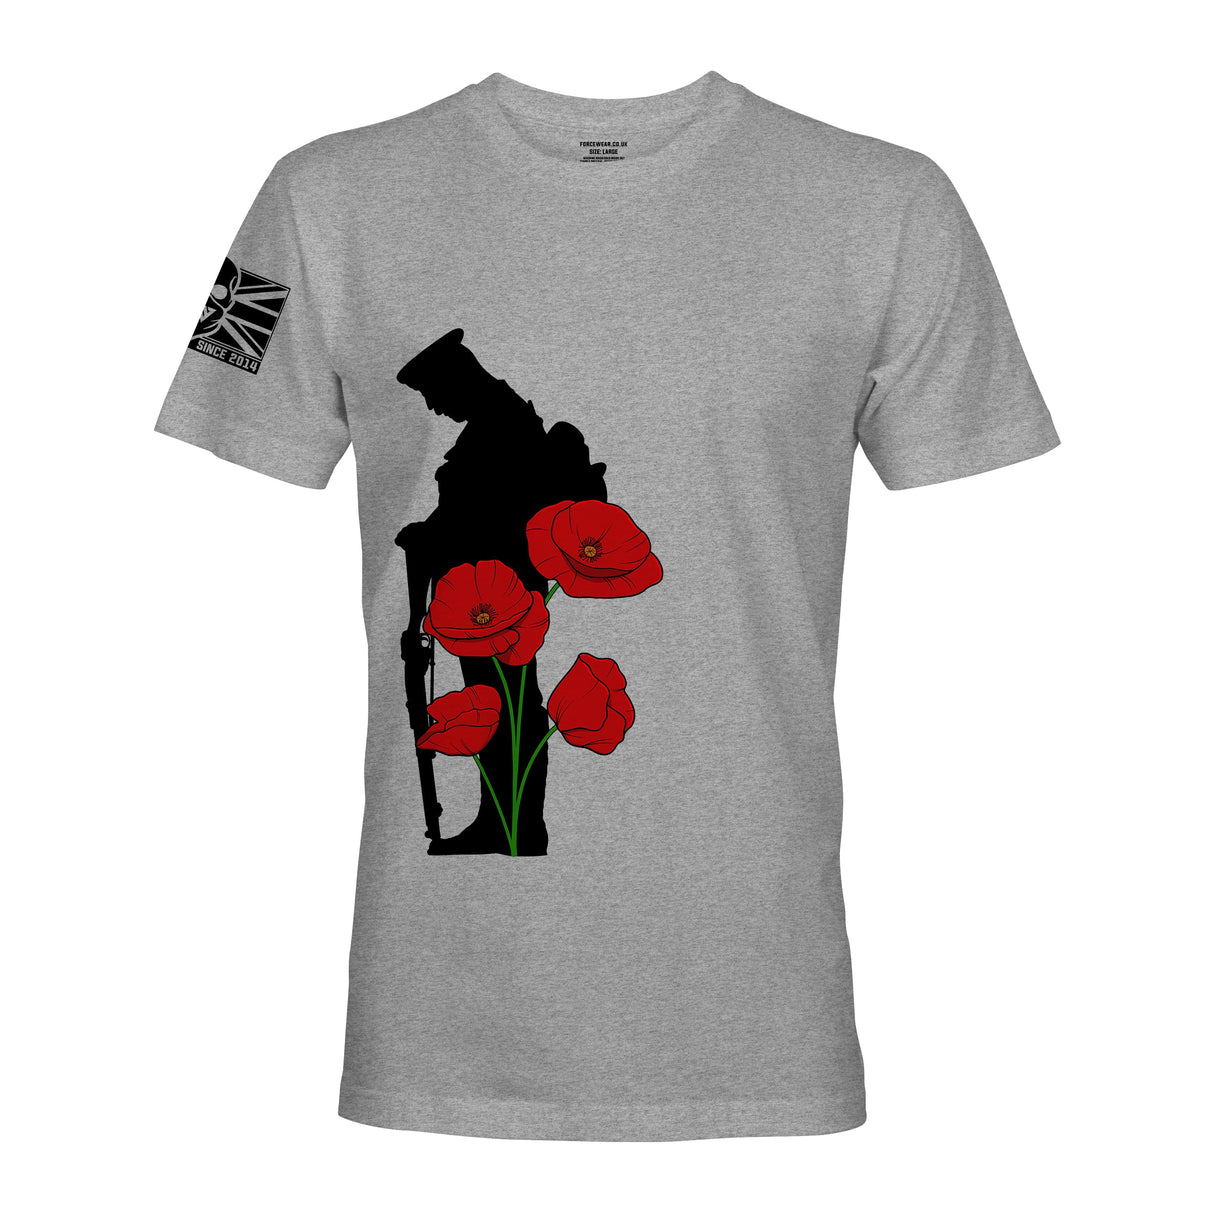 MOURNING SOLDIER - Force Wear HQ - T-SHIRTS